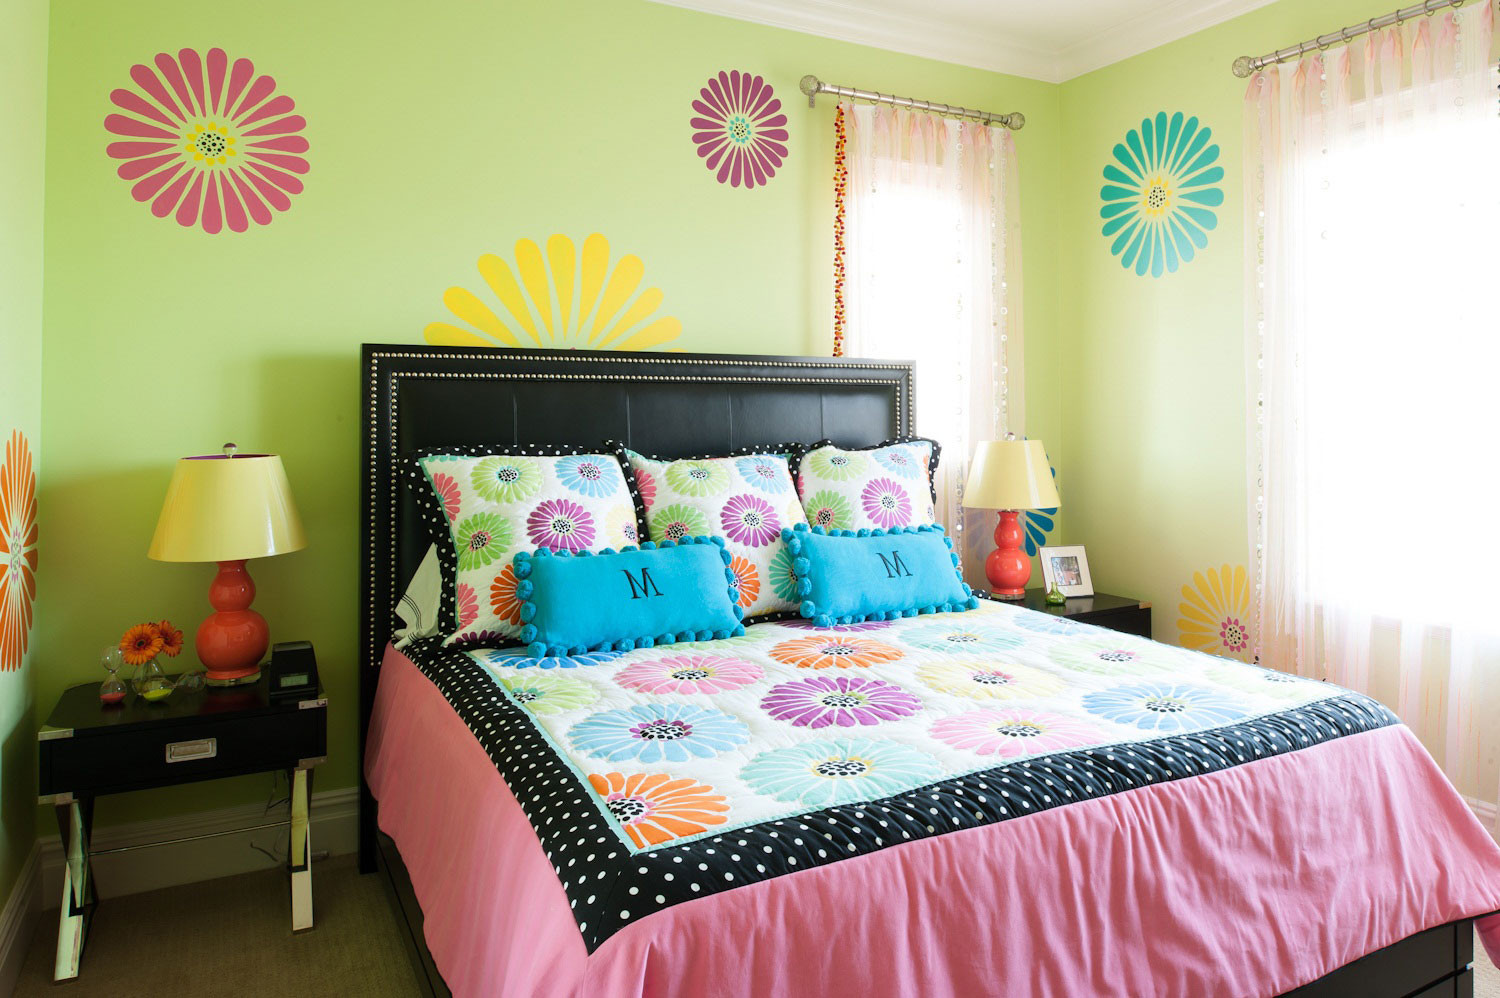 Paint Ideas For Girl Bedroom
 Girls Room Paint Ideas with Feminine Touch Amaza Design